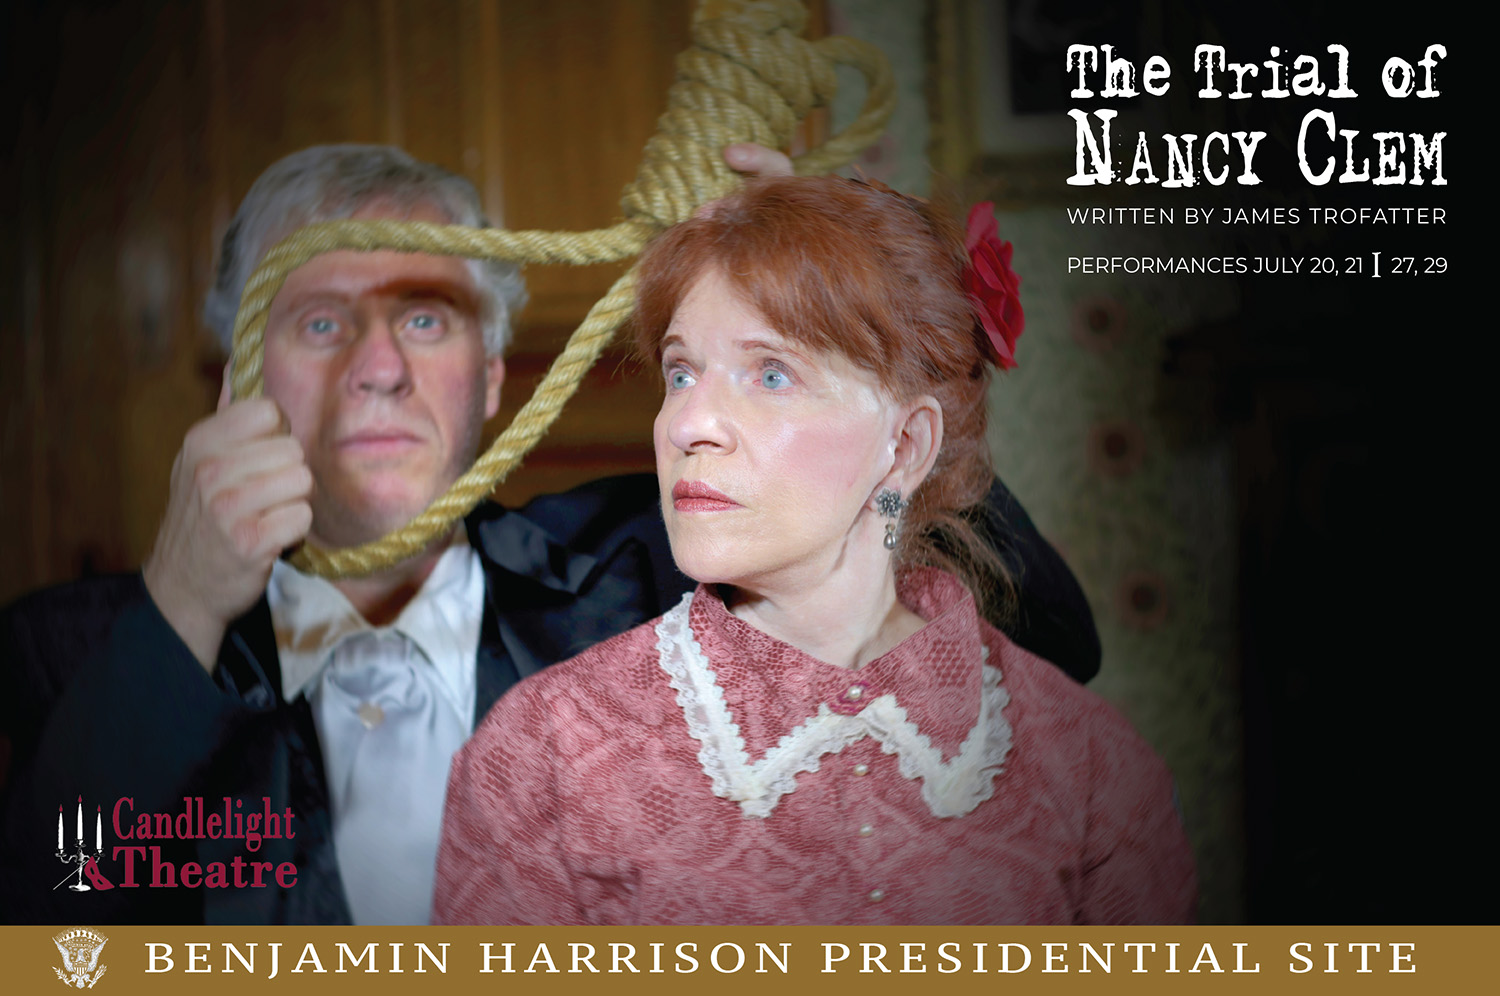 Photograph of two actors in candlelight theater. A woman stands in the foreground, and a man behind her prepares to put a noose around her neck.. Text reads: The Trial of Nancy Clem by James Trofatter. Performances july 20, 21. 27, 29. Candlelight Theatre benjamin harrison presidential site.